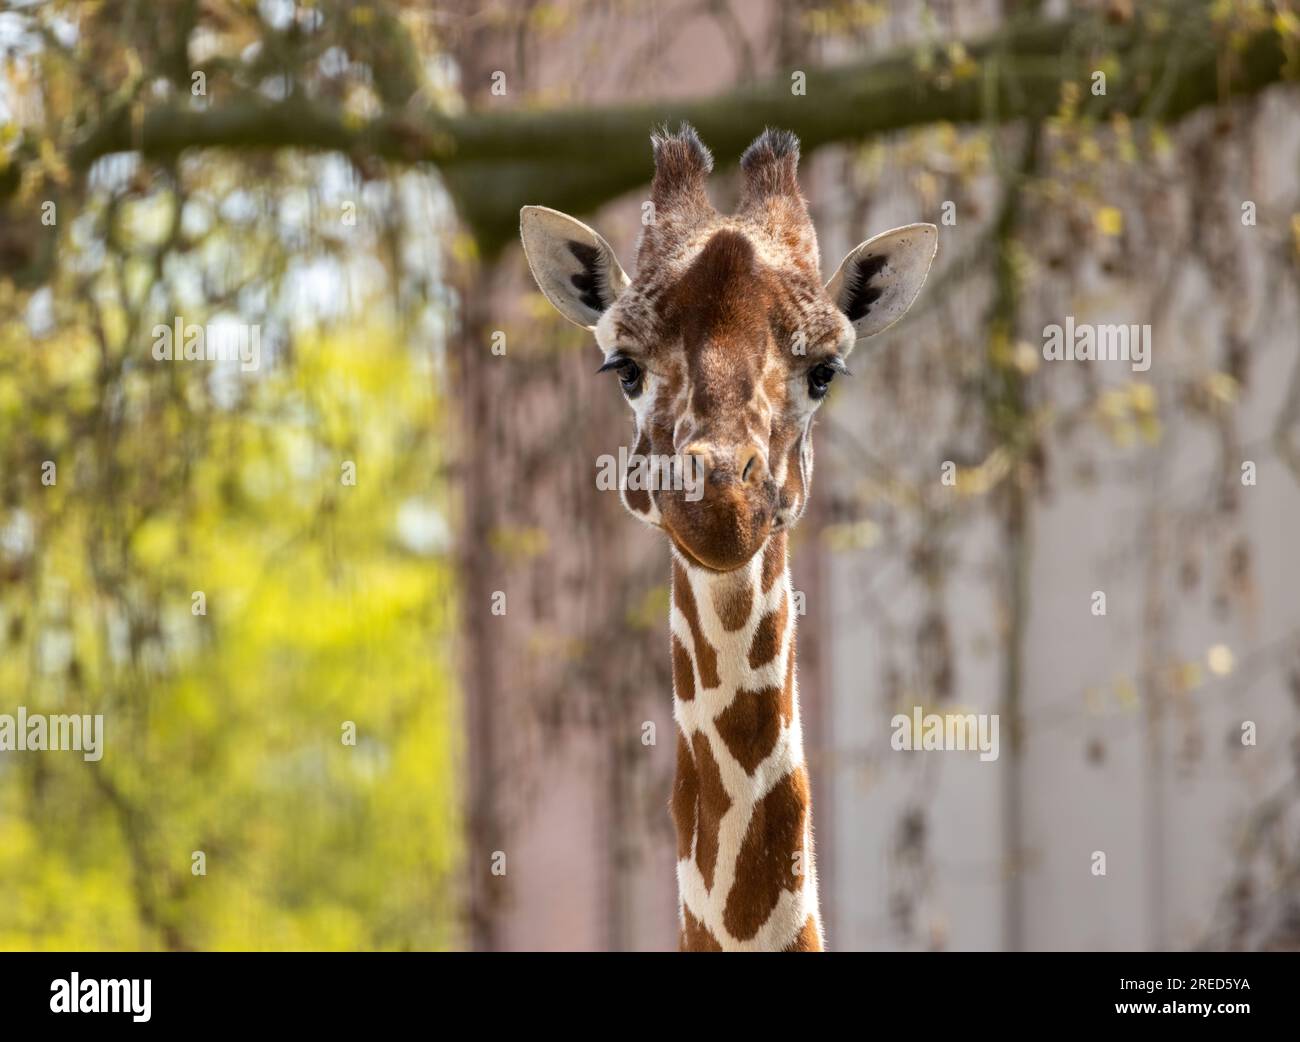 Giraffe pulling funny faces and sticking long tongue out Stock Photo